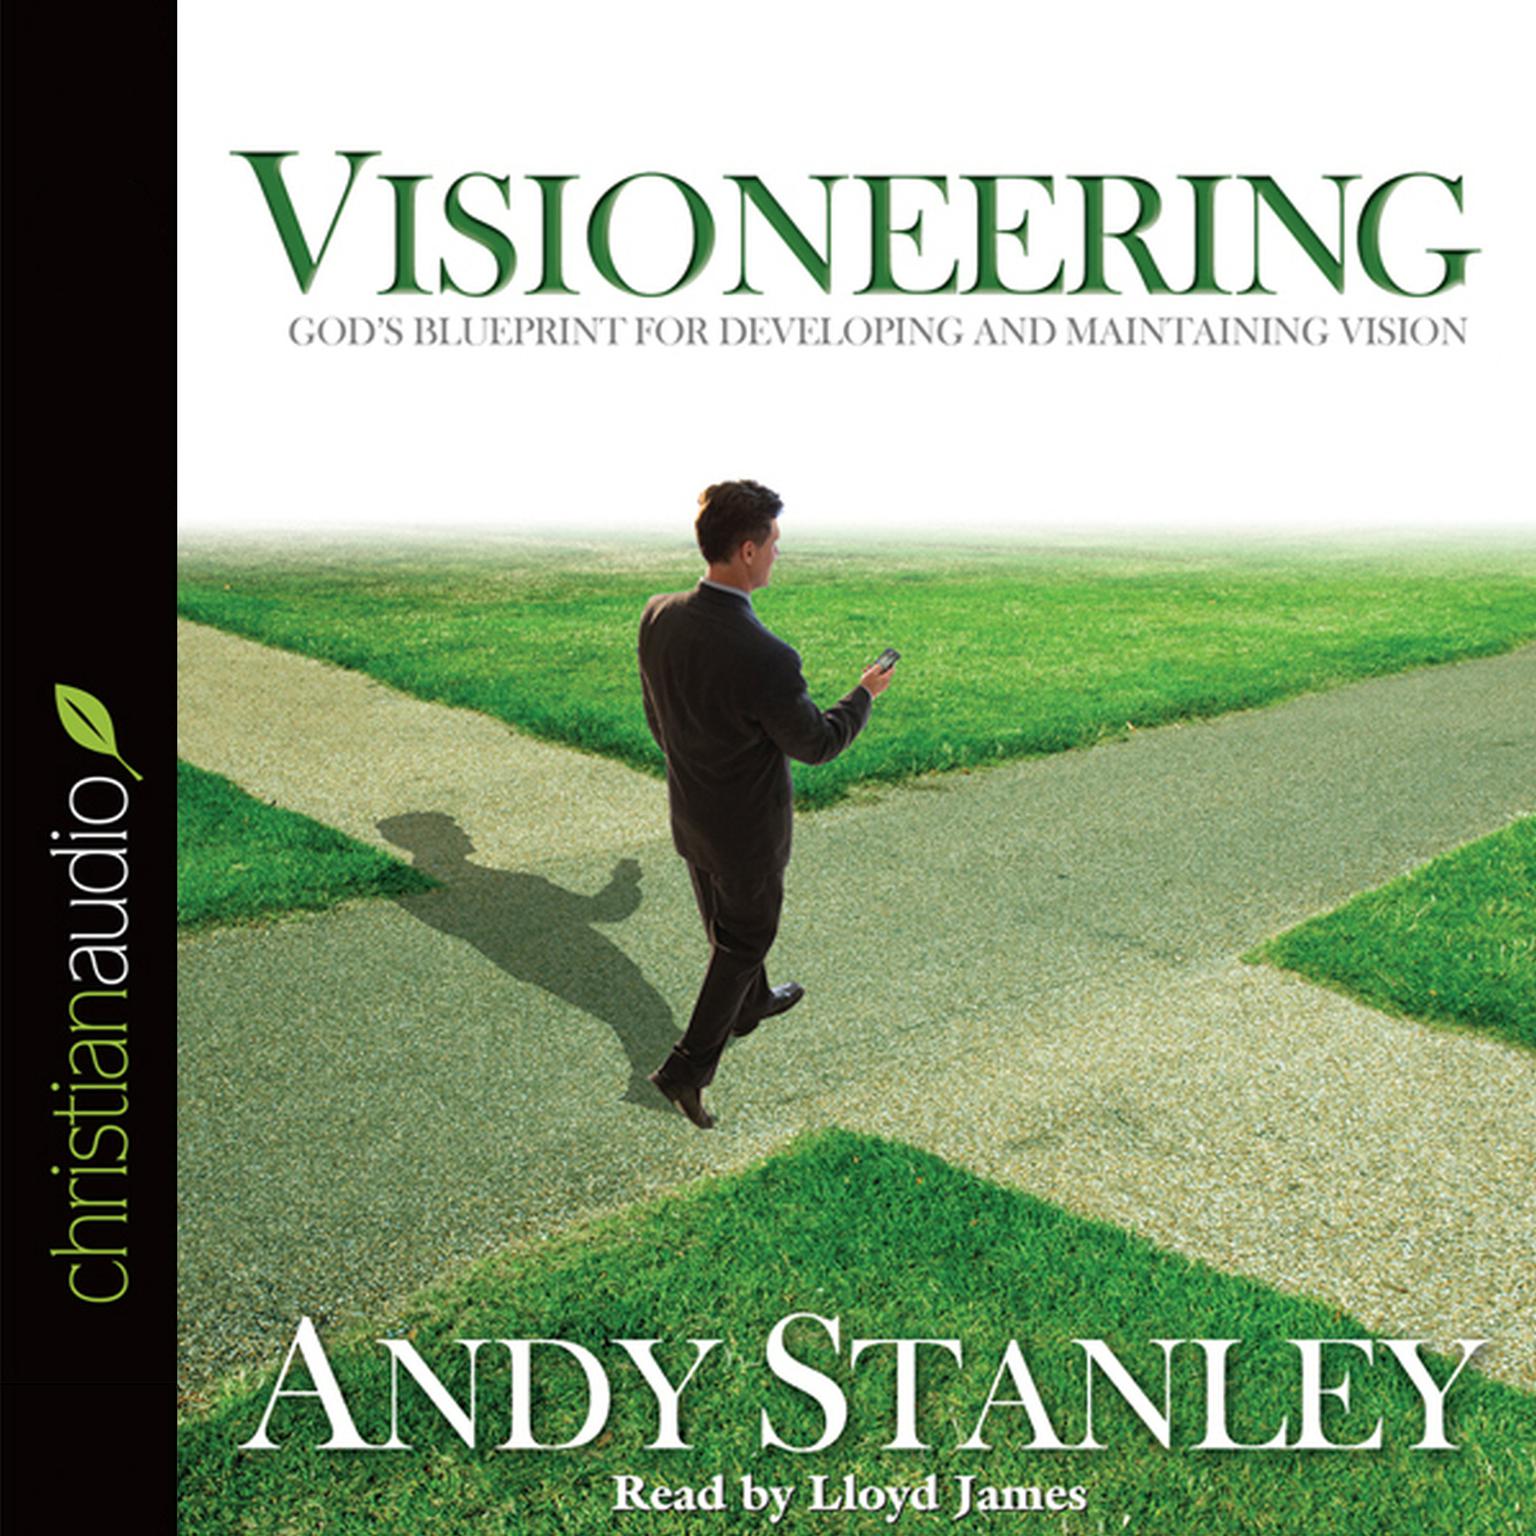 Visioneering: Gods Blueprint for Developing and Maintaining Vision Audiobook, by Andy Stanley